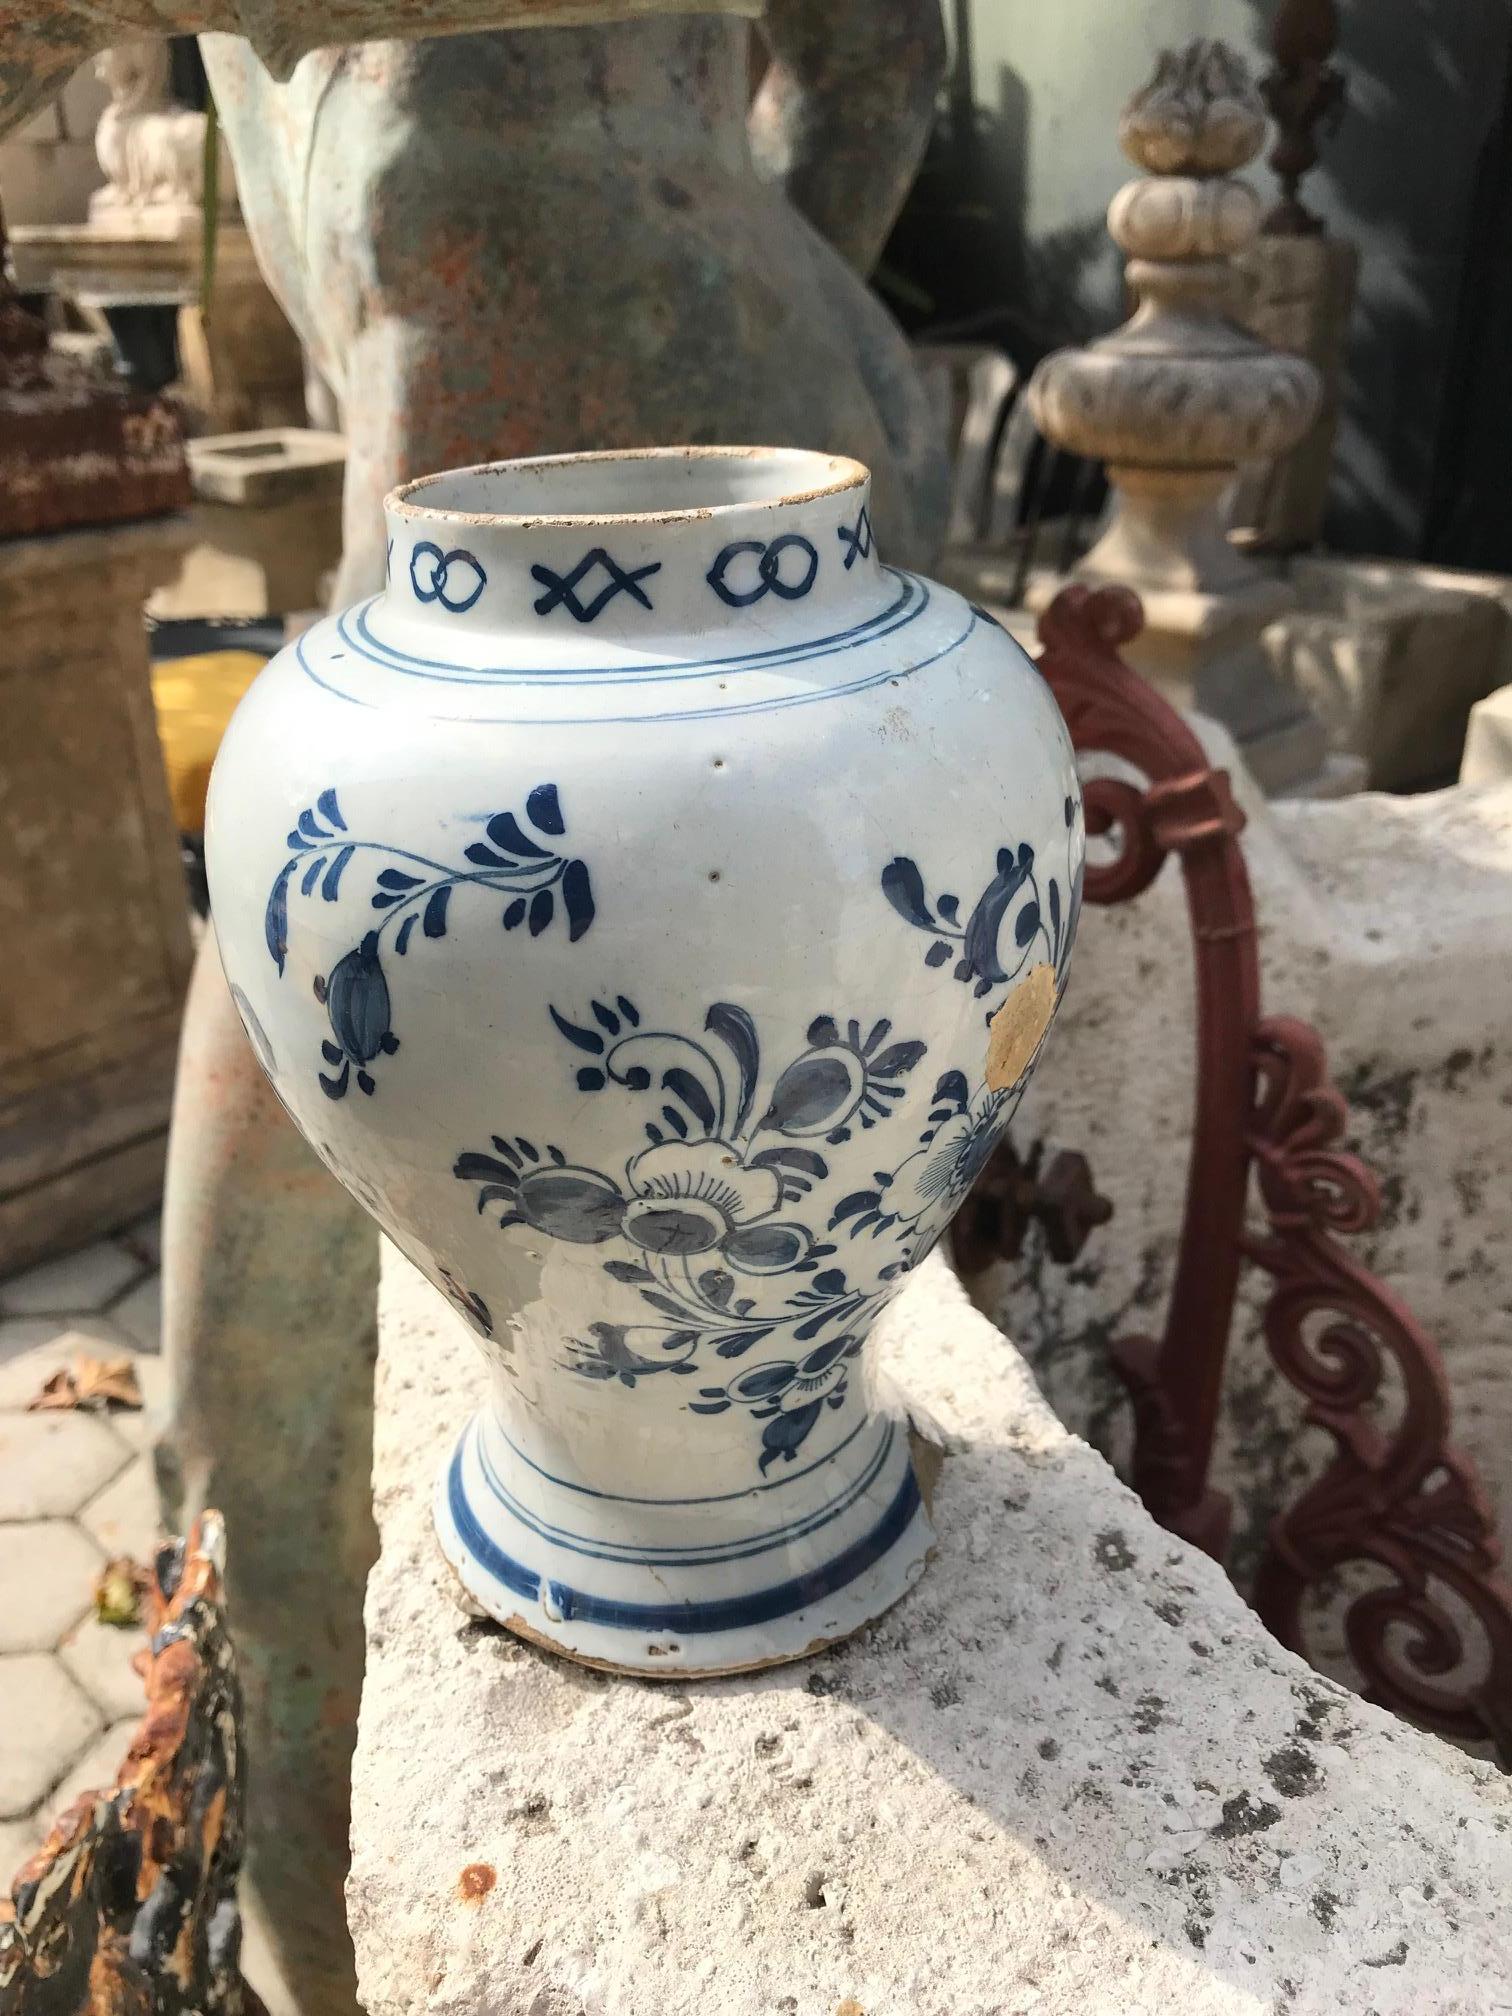 A very fine 18th century Dutch Delft Blue and White pottery vase or jar. Of typical vasiform shape with medium and deep blue Chinoiserie landscape decoration, decorated border to the top rim, and Mirrored Circles at the base . Hand painted in shades